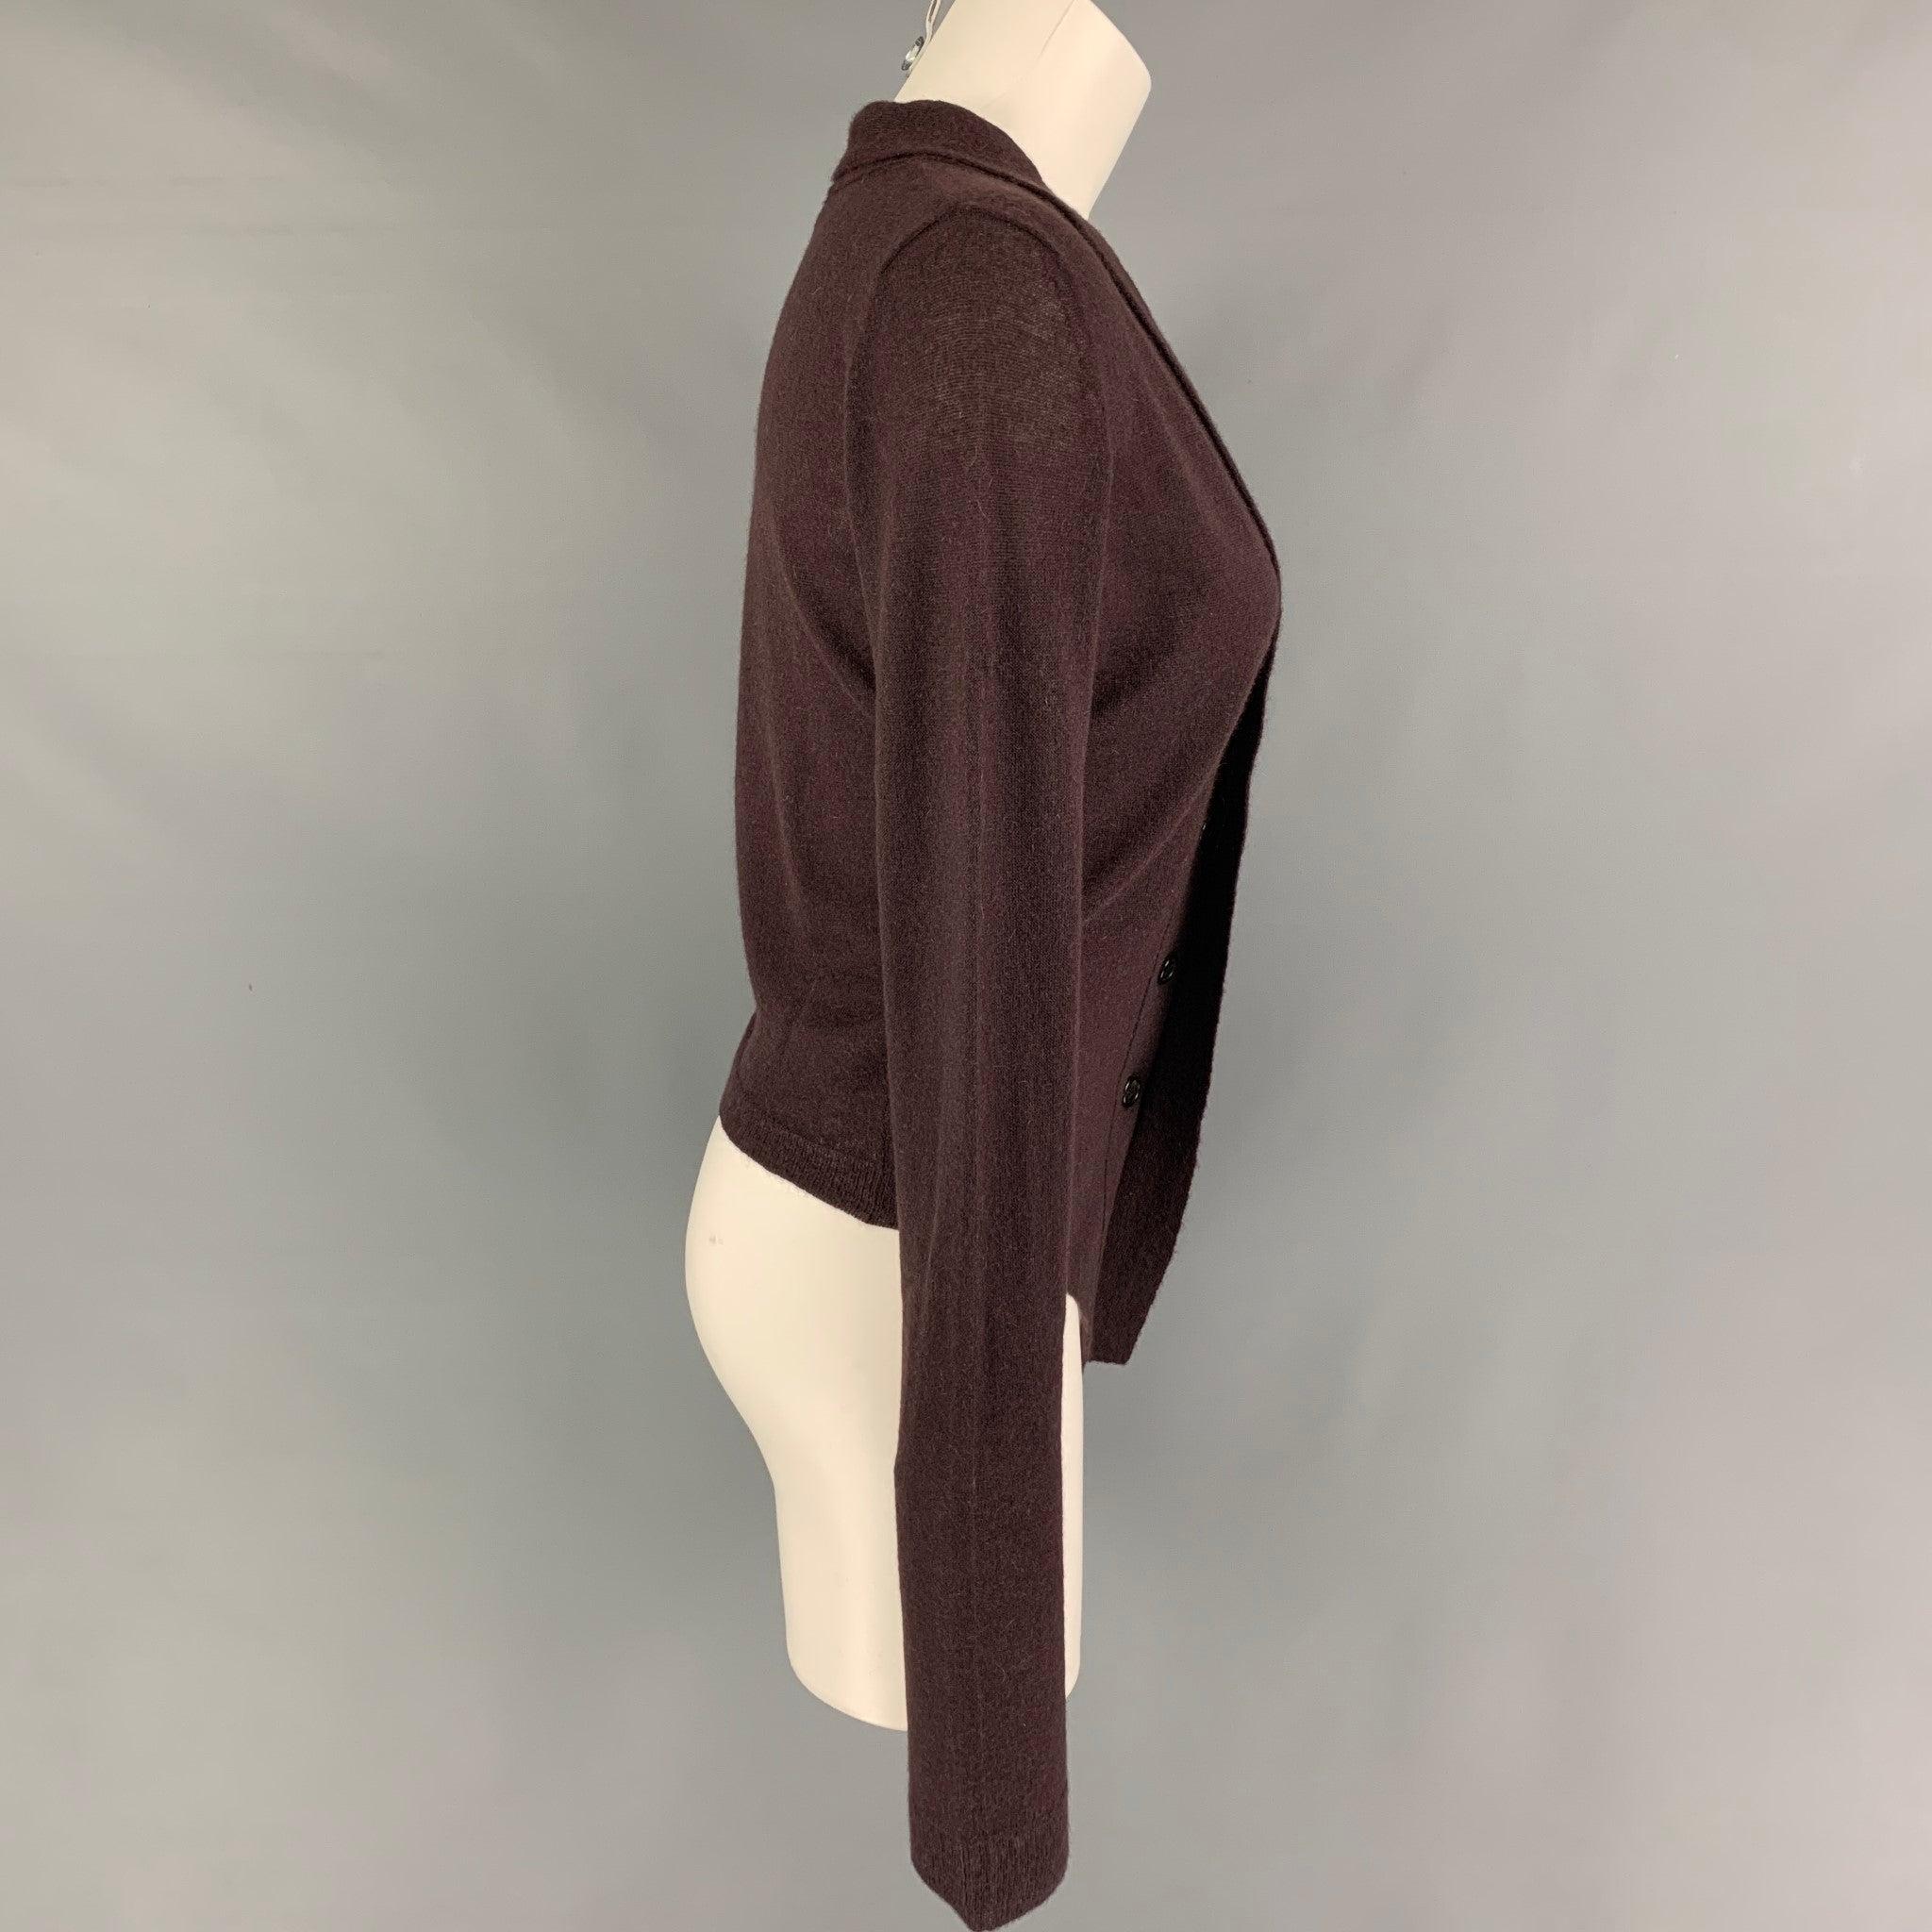 ANN DEMEULEMEESTER Size 6 Burgundy Cashmere Blend Knitted Cardigan In Good Condition For Sale In San Francisco, CA